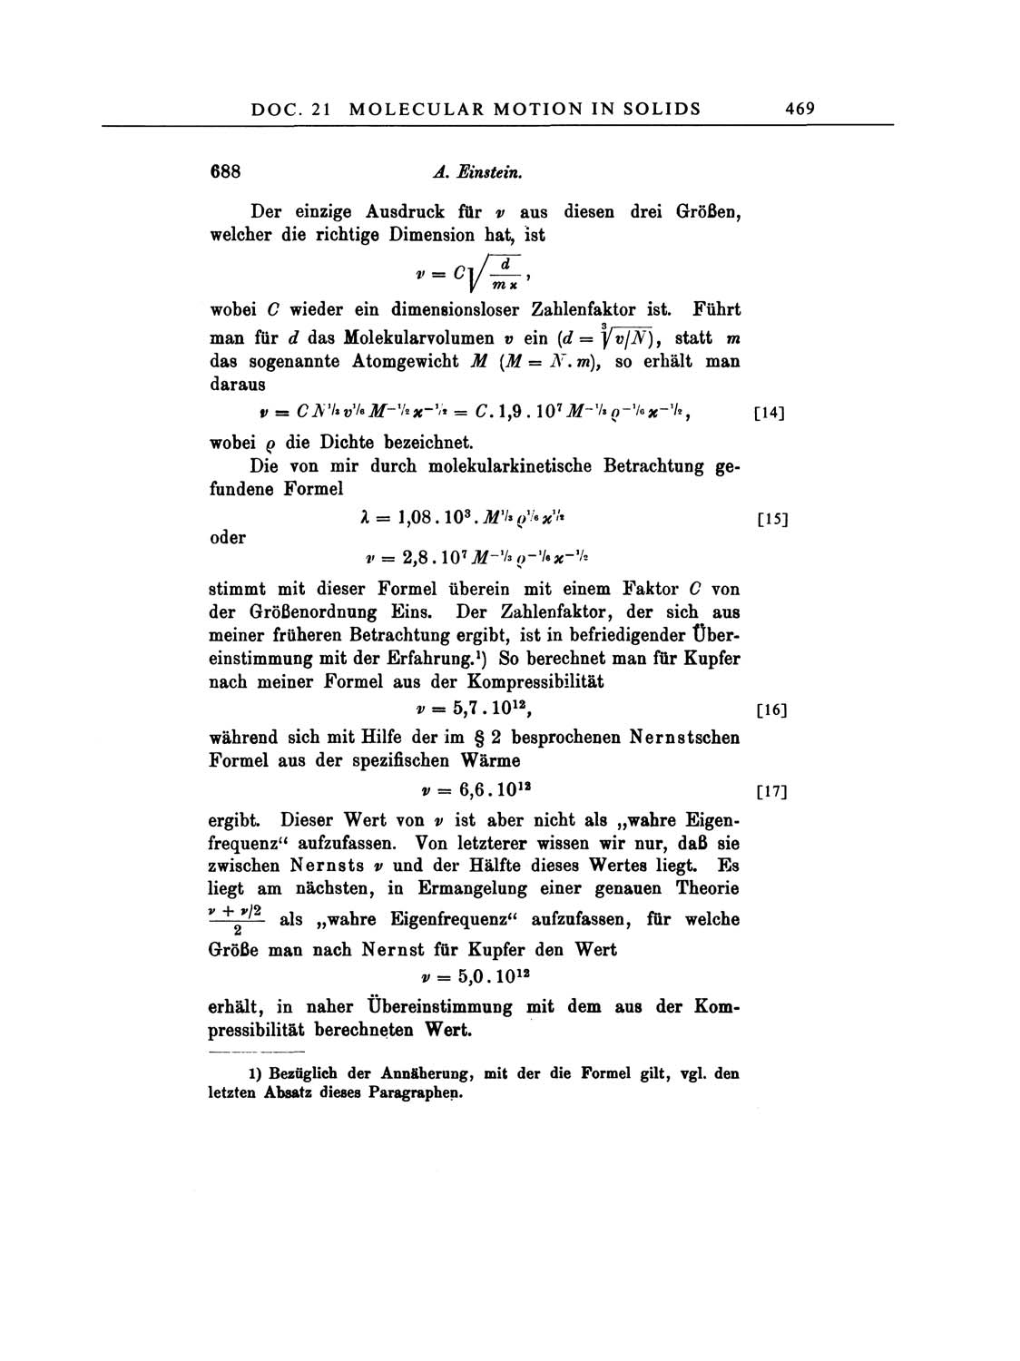 Volume 3: The Swiss Years: Writings 1909-1911 page 469